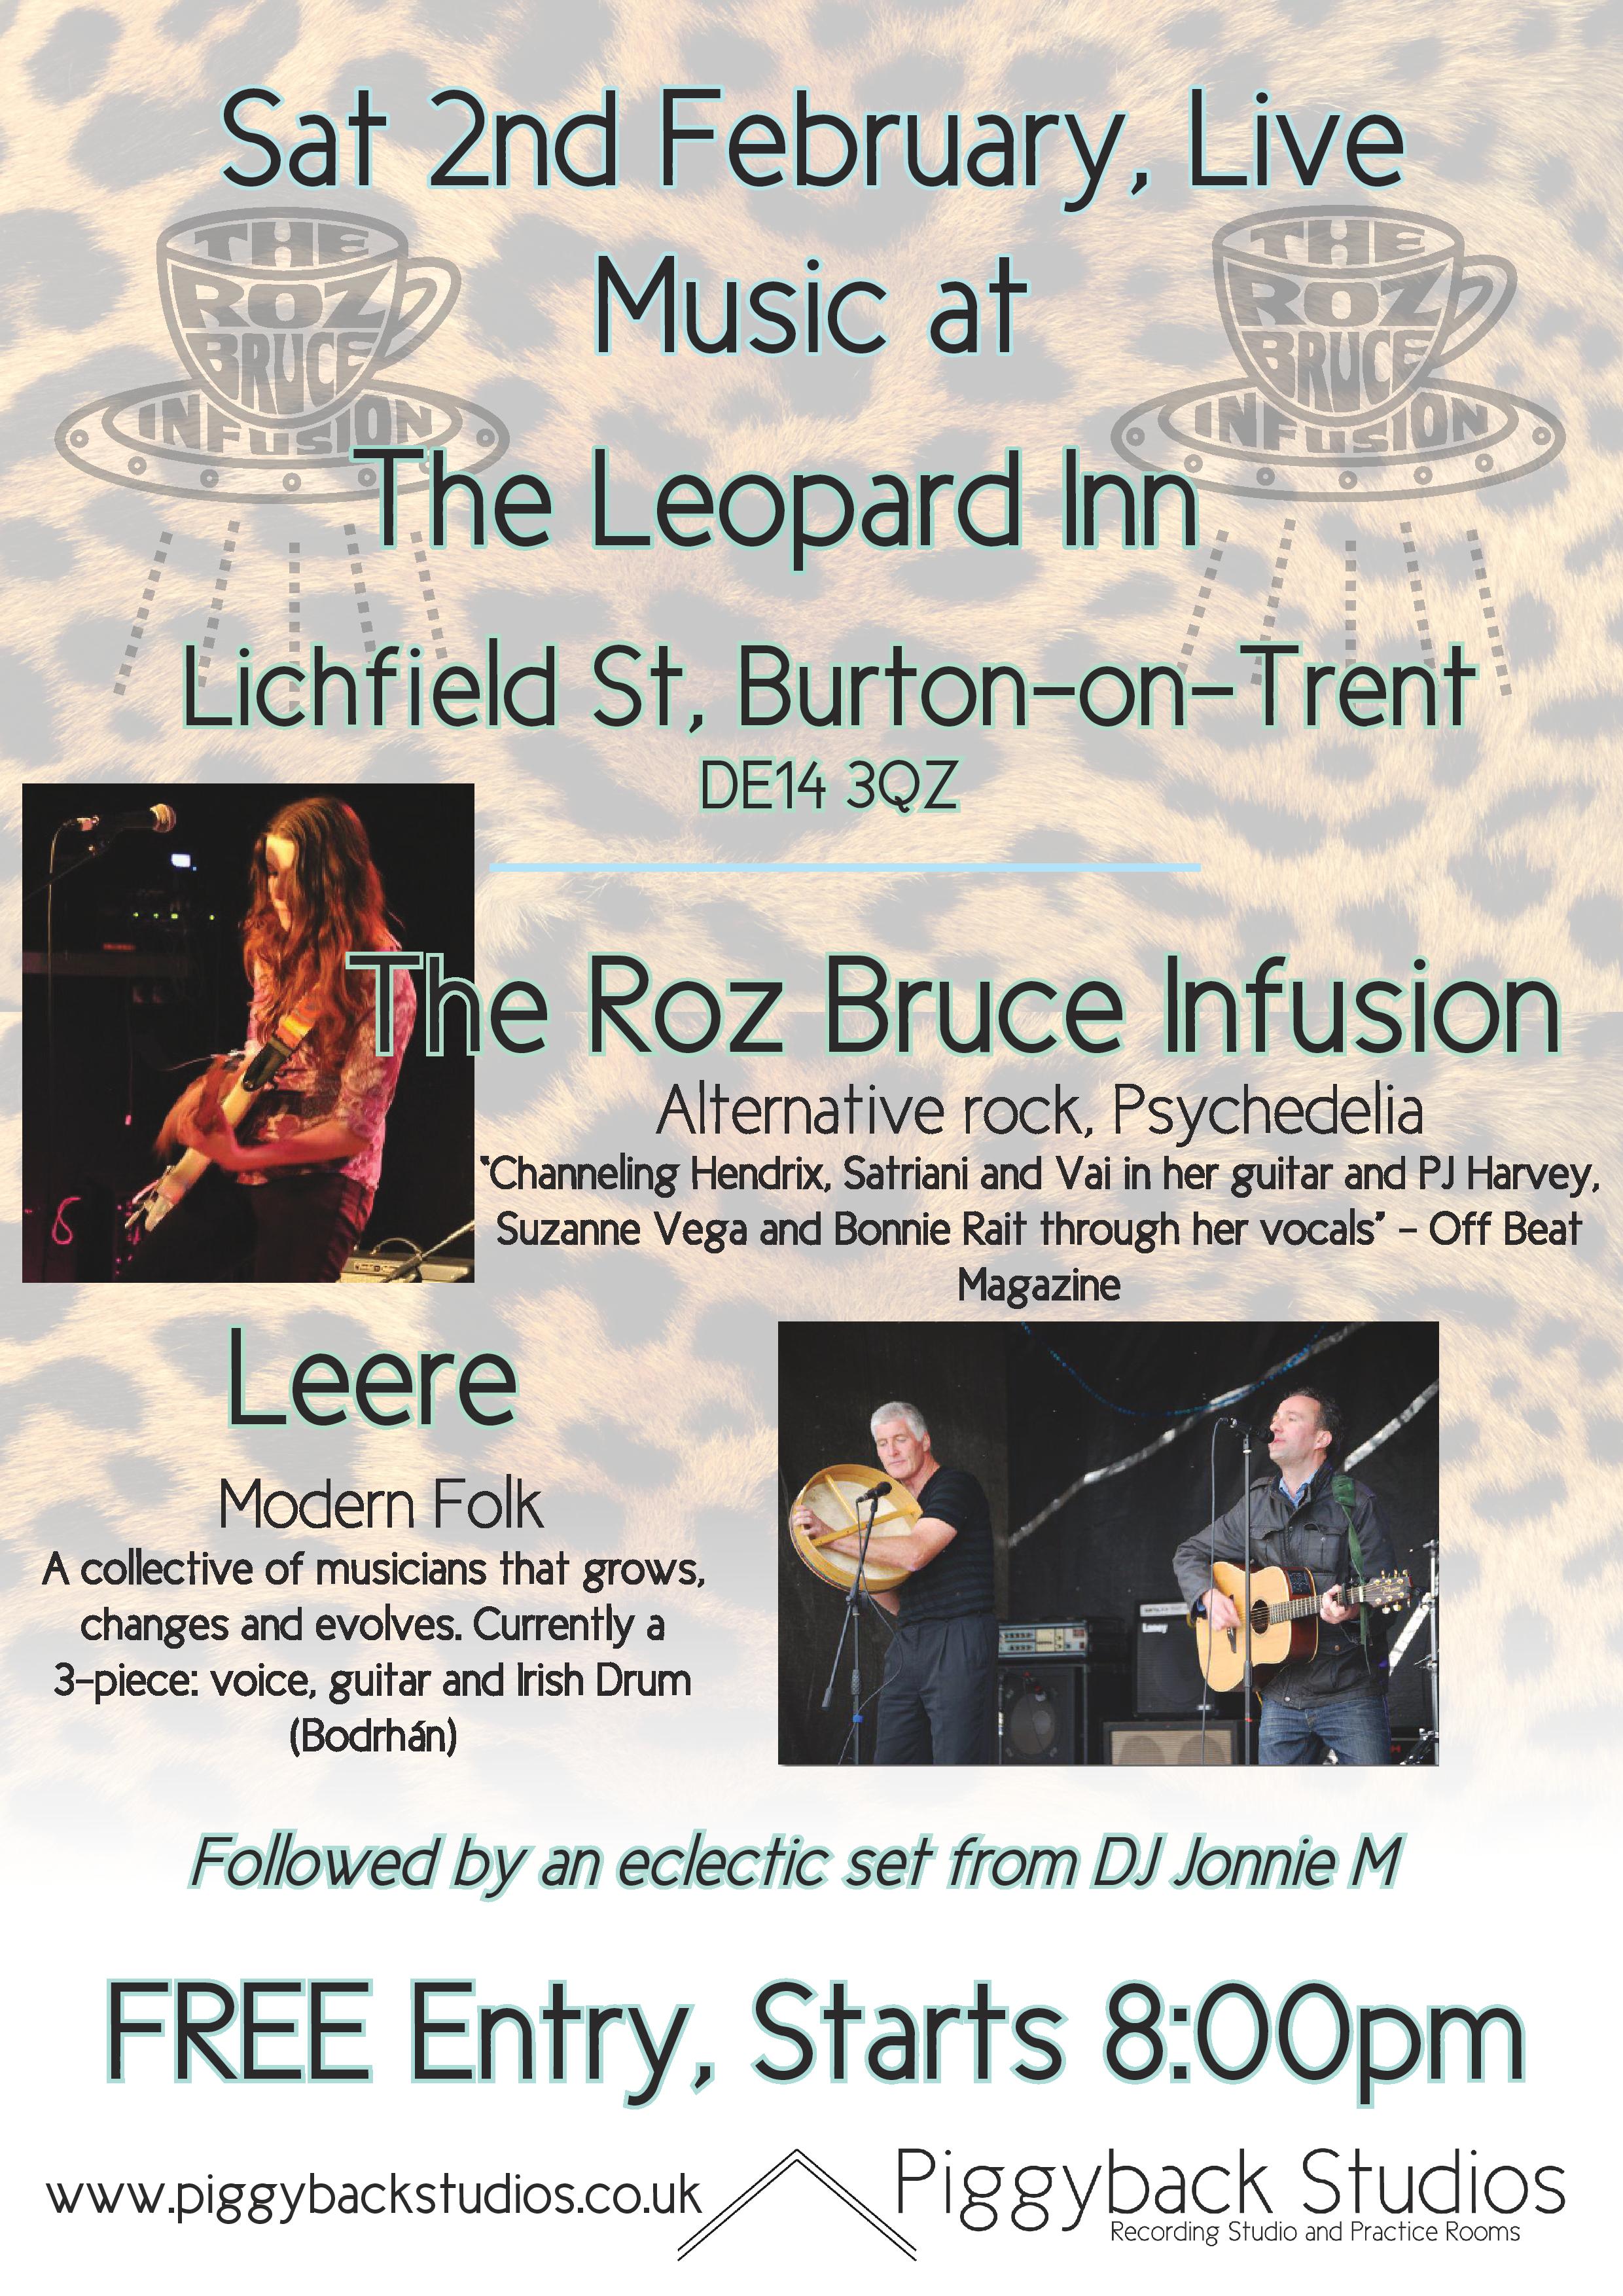 The Roz Bruce Infusion at The Leopard